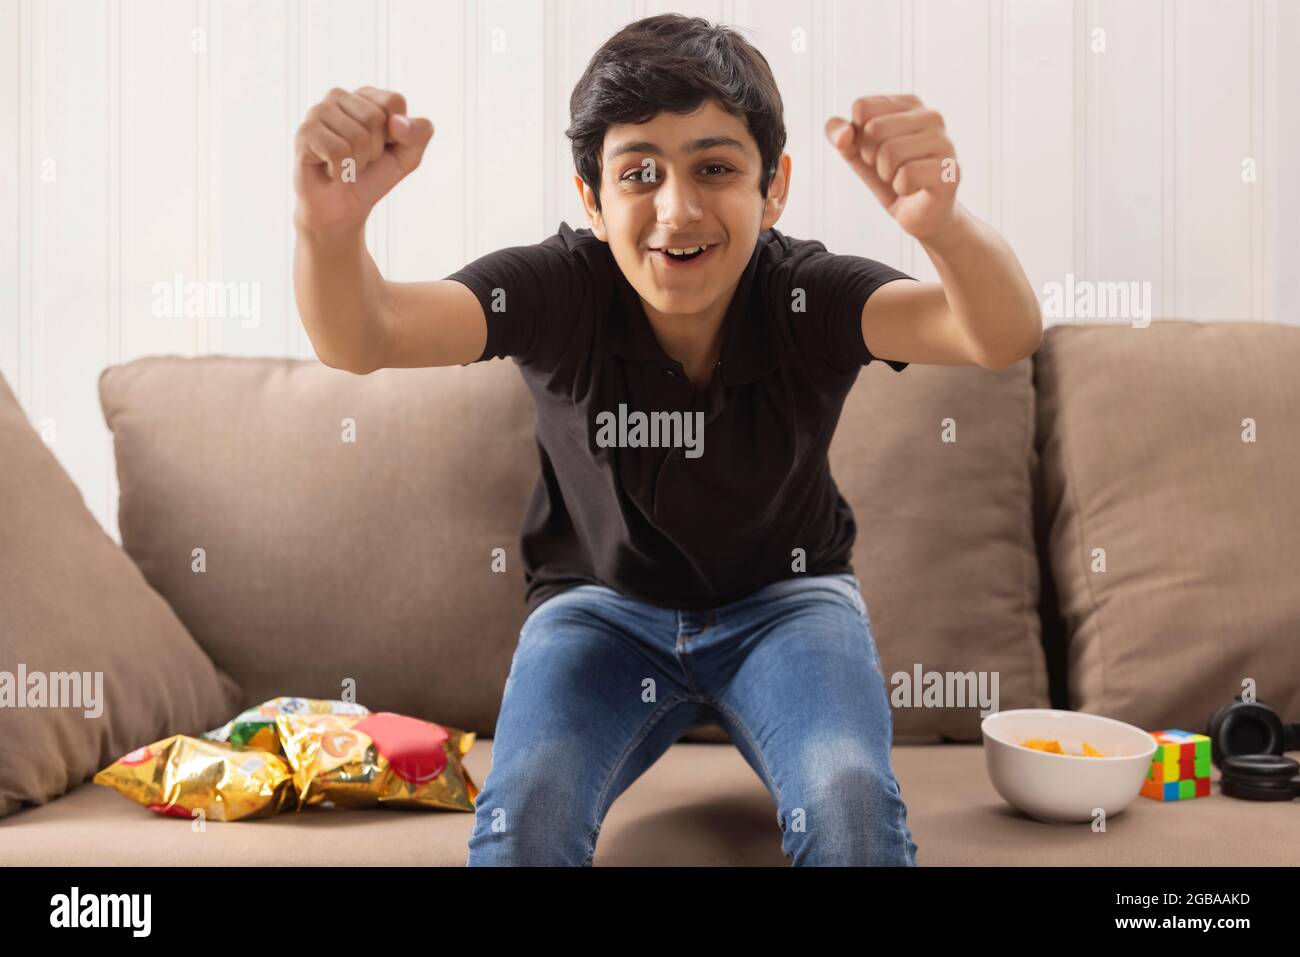 A TEENAGE BOY EXCITEDLY LOOKING AT CAMERA WHILE EATING SNACKS Stock Photo